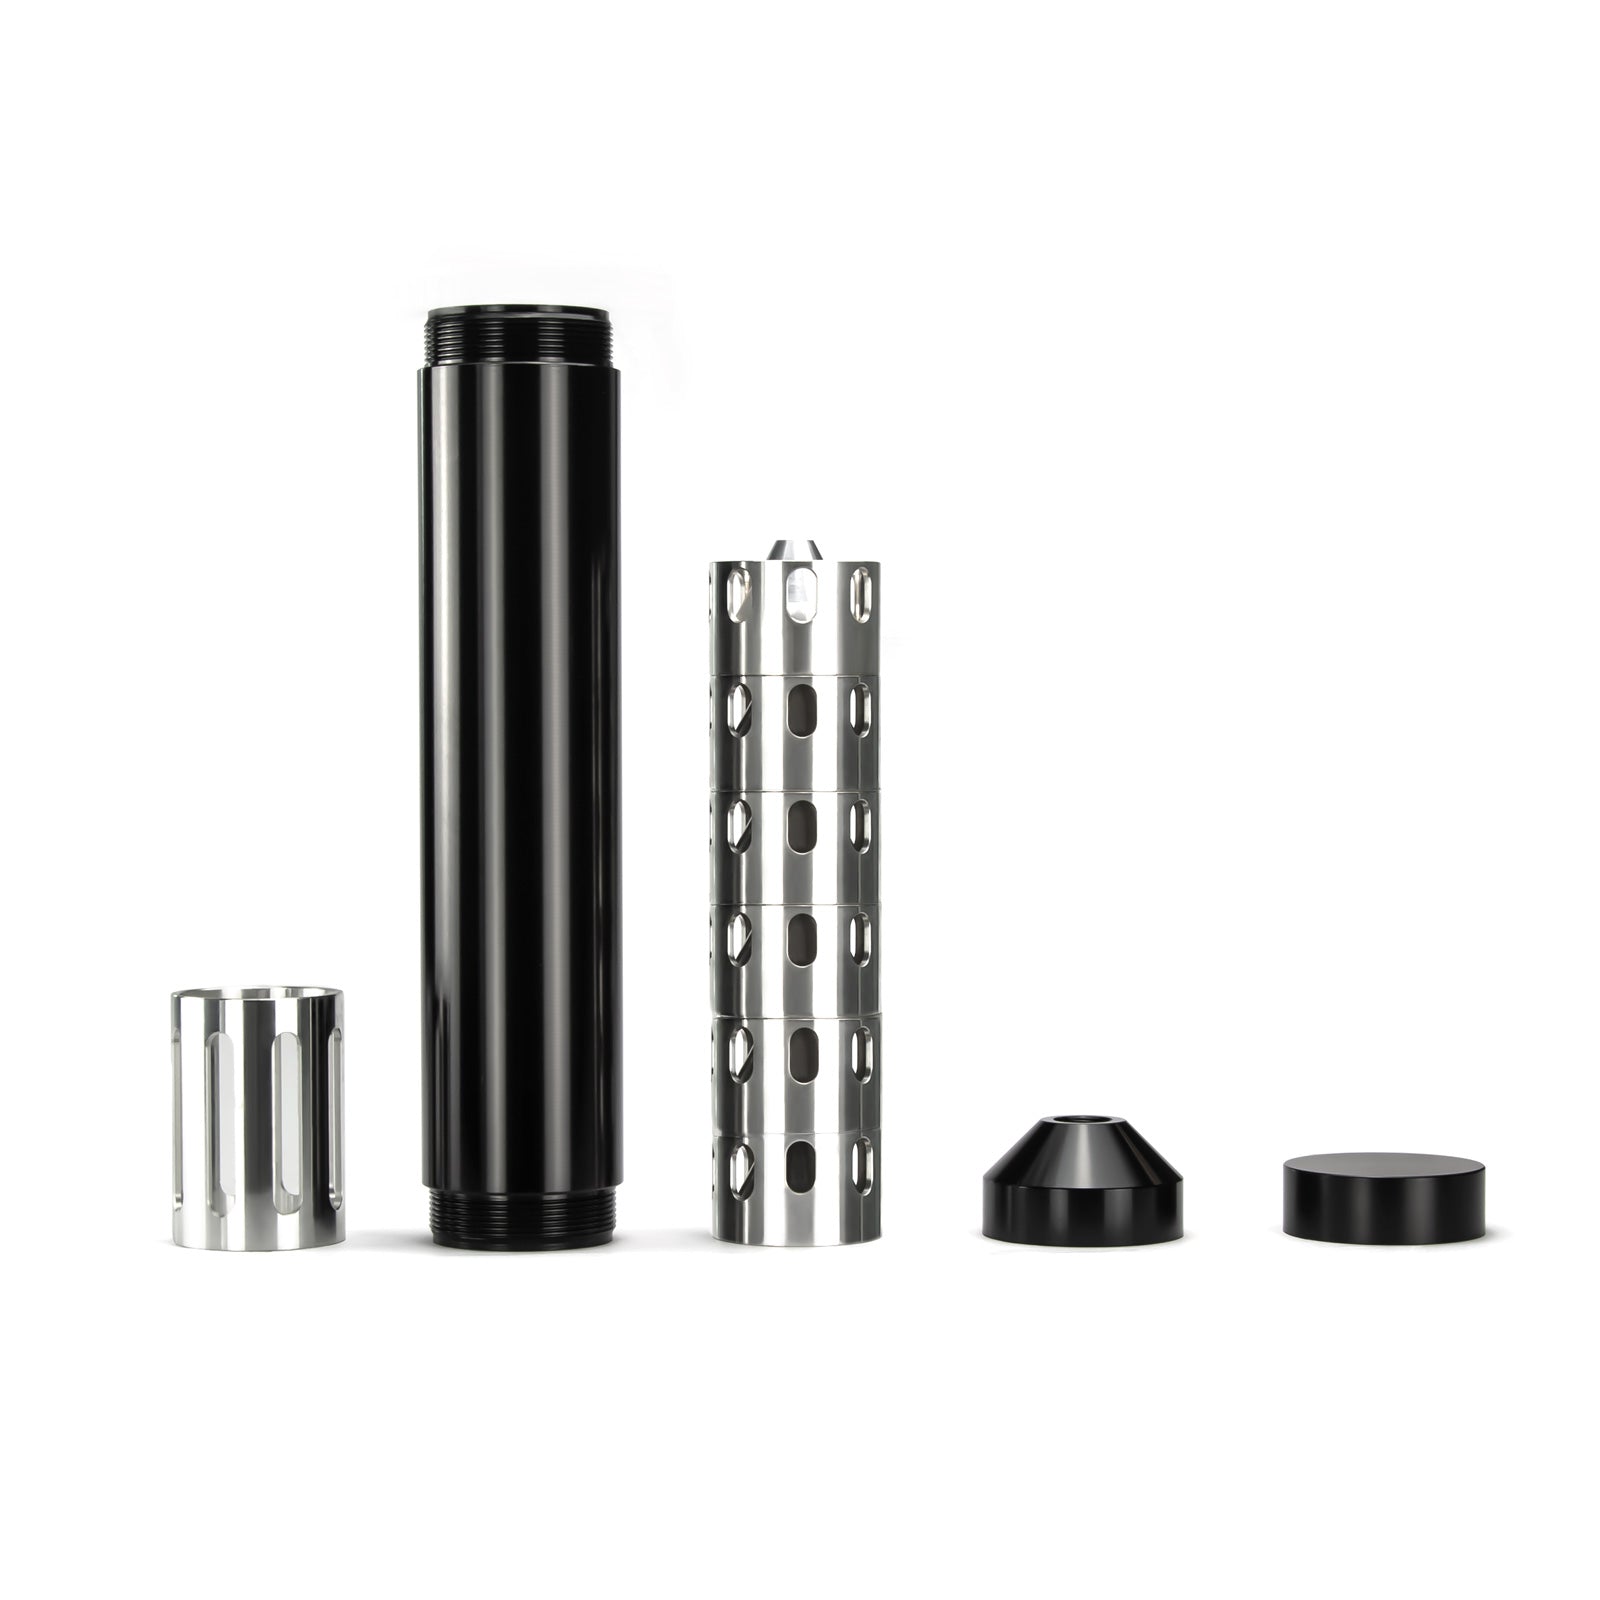 Solvent Trap Tube Kit | Aluminum Ring Style 5/8x24 and 1/2x28 End Cap